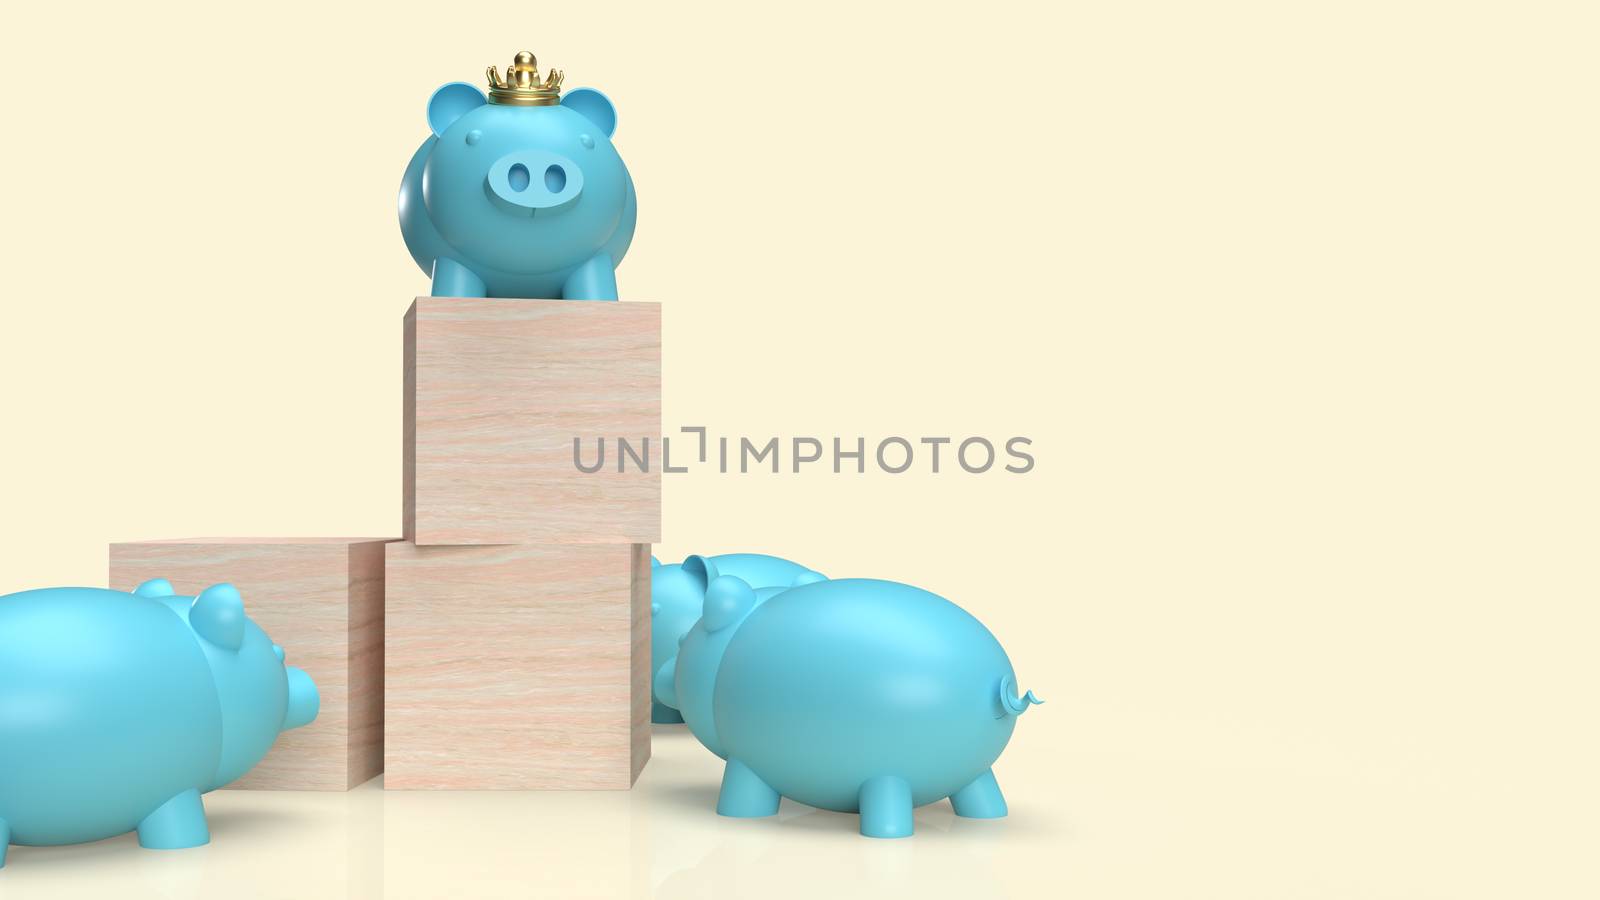 blue pig bank and crown on wood cube for business content 3d rendering